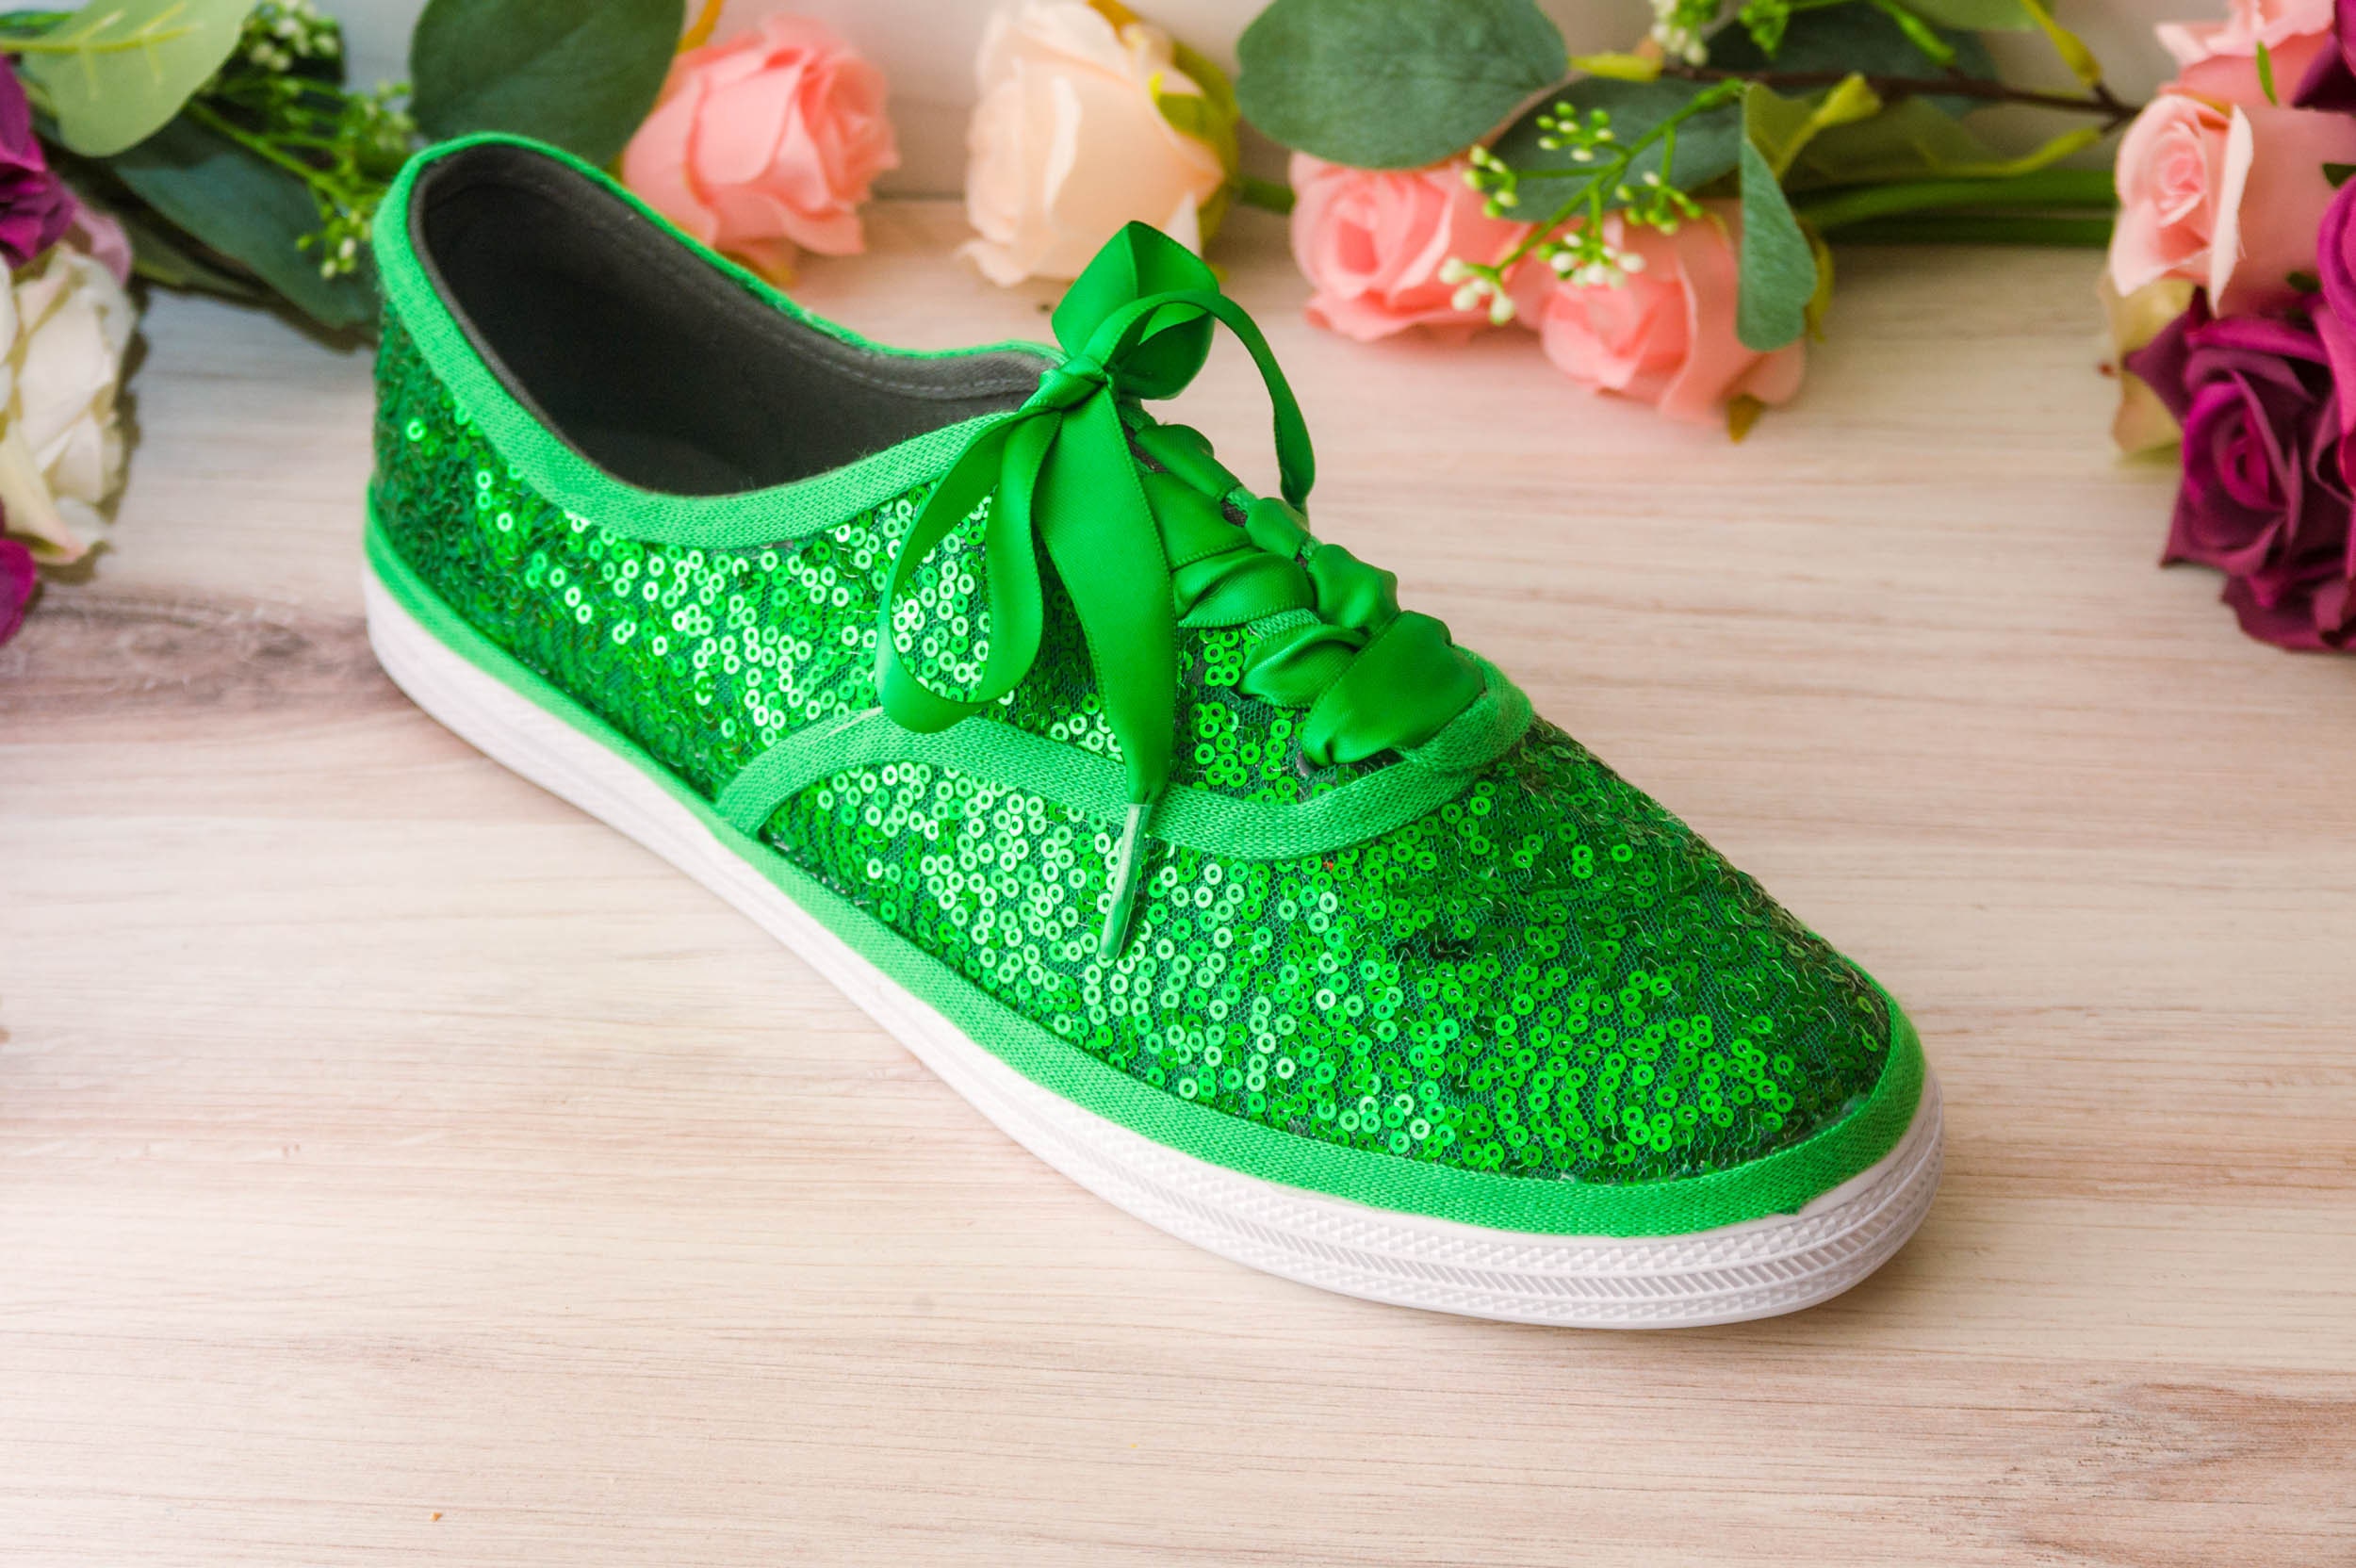 2019 Under $30 Gift Guide - Green Wedding Shoes